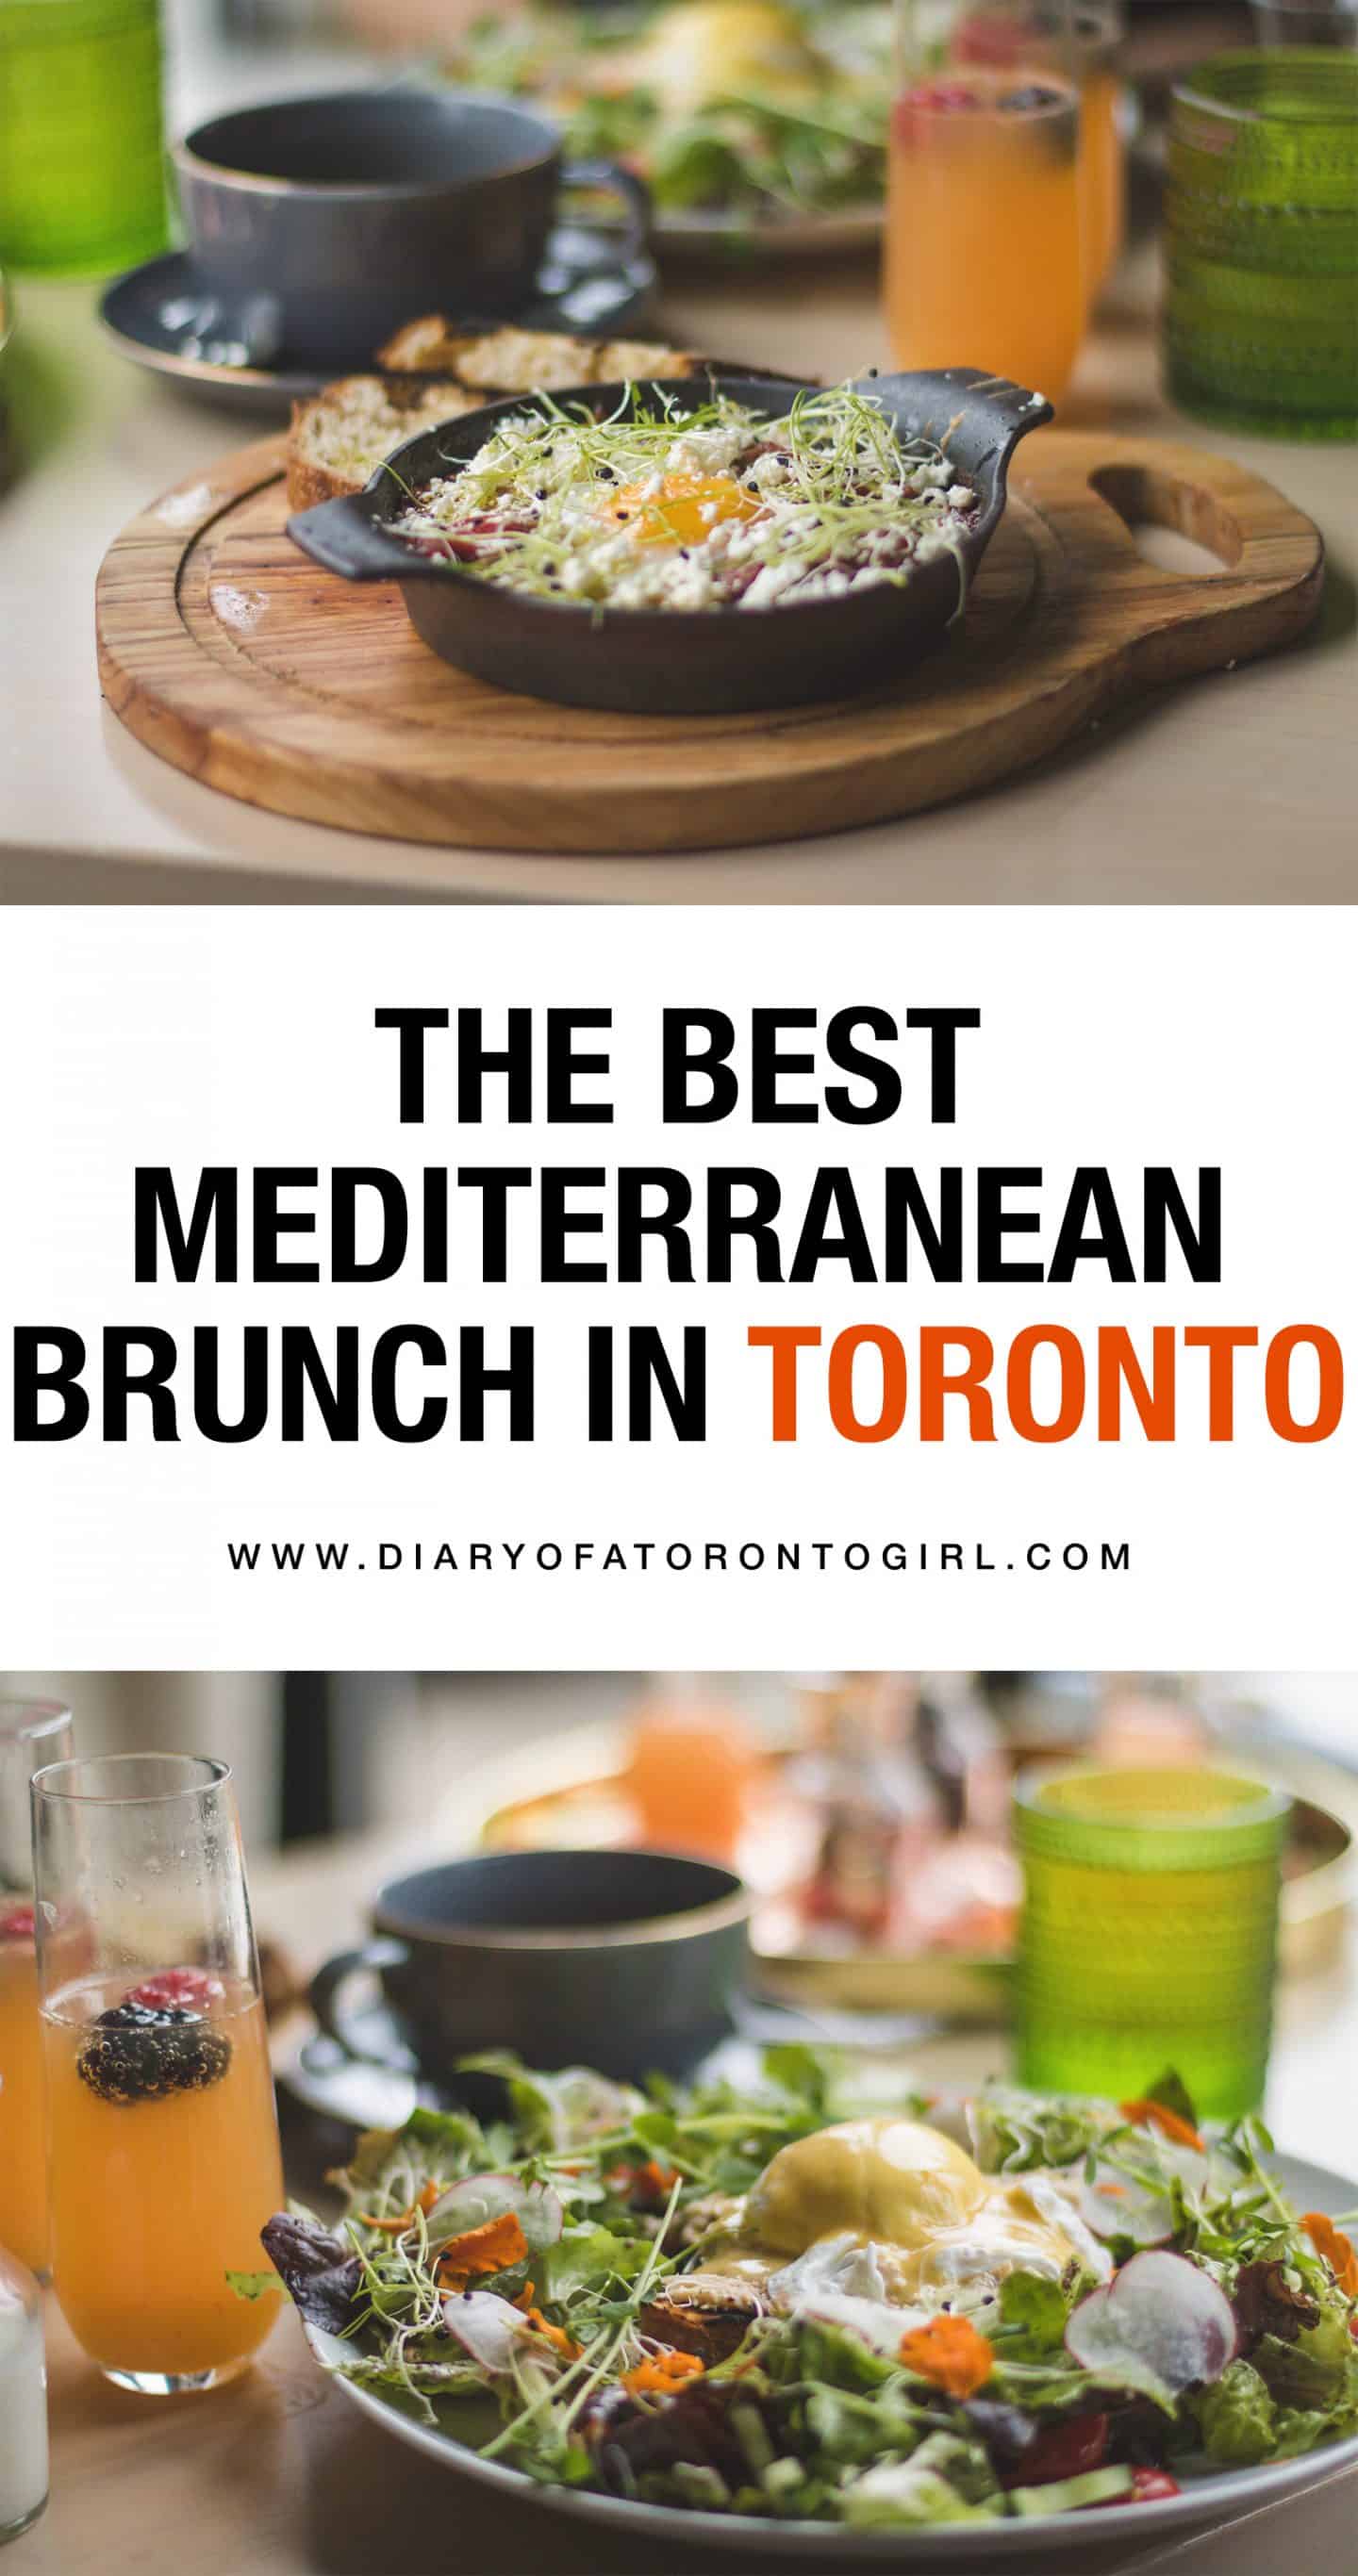 Reyna on King is the best Mediterranean brunch restaurant in Toronto, Canada! Here's a taste of their delicious breakfast offerings and cocktails.